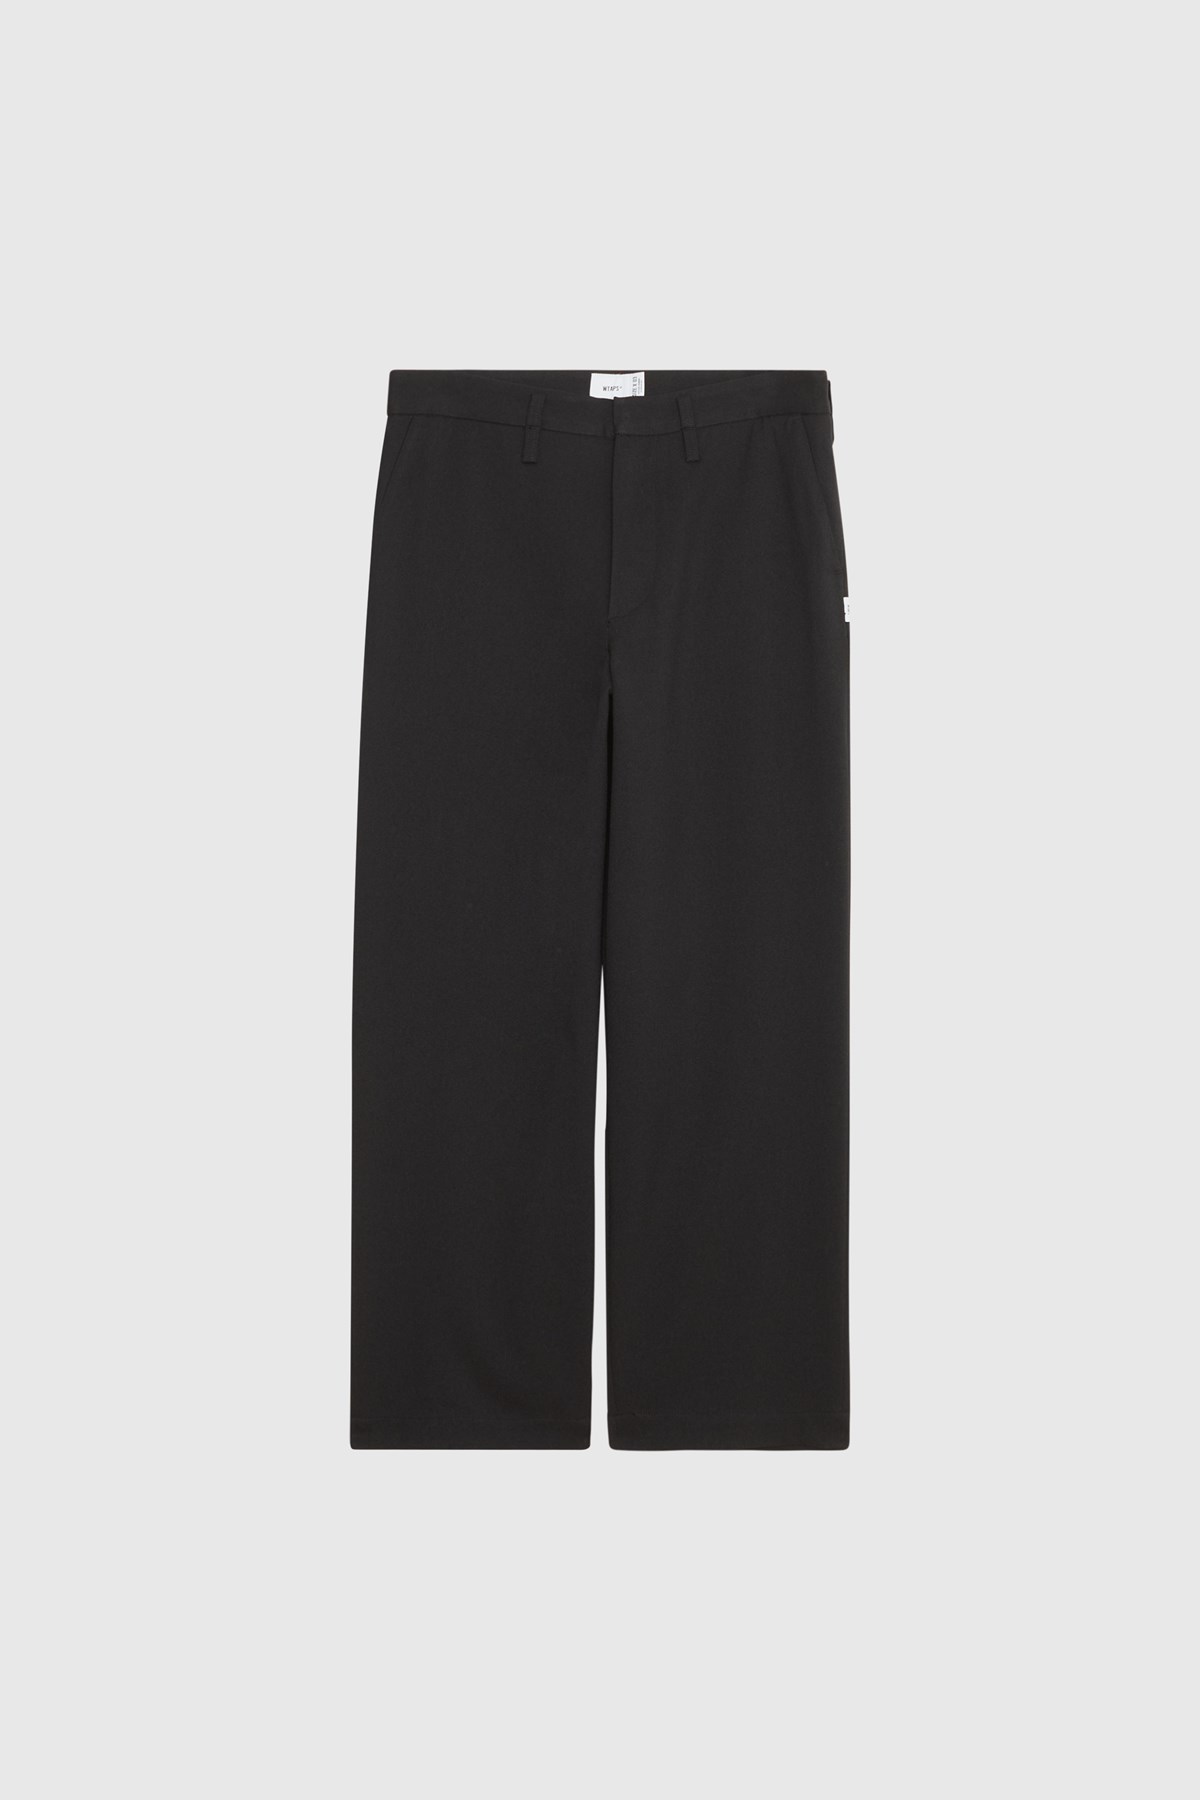 WTAPS Crease DL / Trousers Black | WoodWood.com